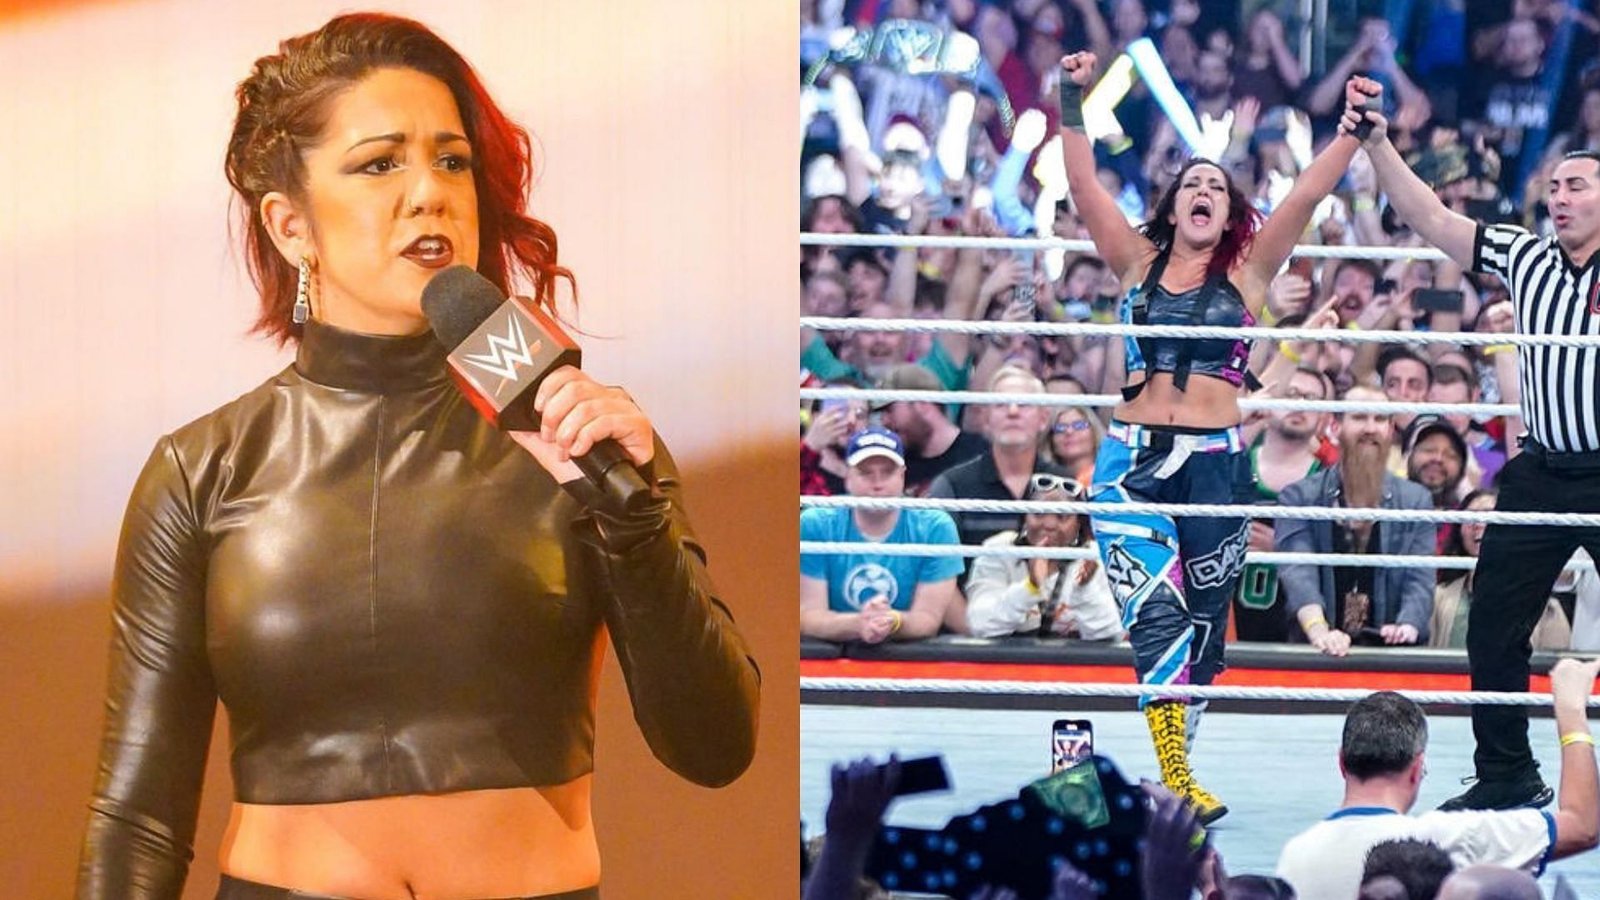 “This was my night” – Bayley claims she had no idea that two of WWE’s biggest stars would be in The Royal Rumble